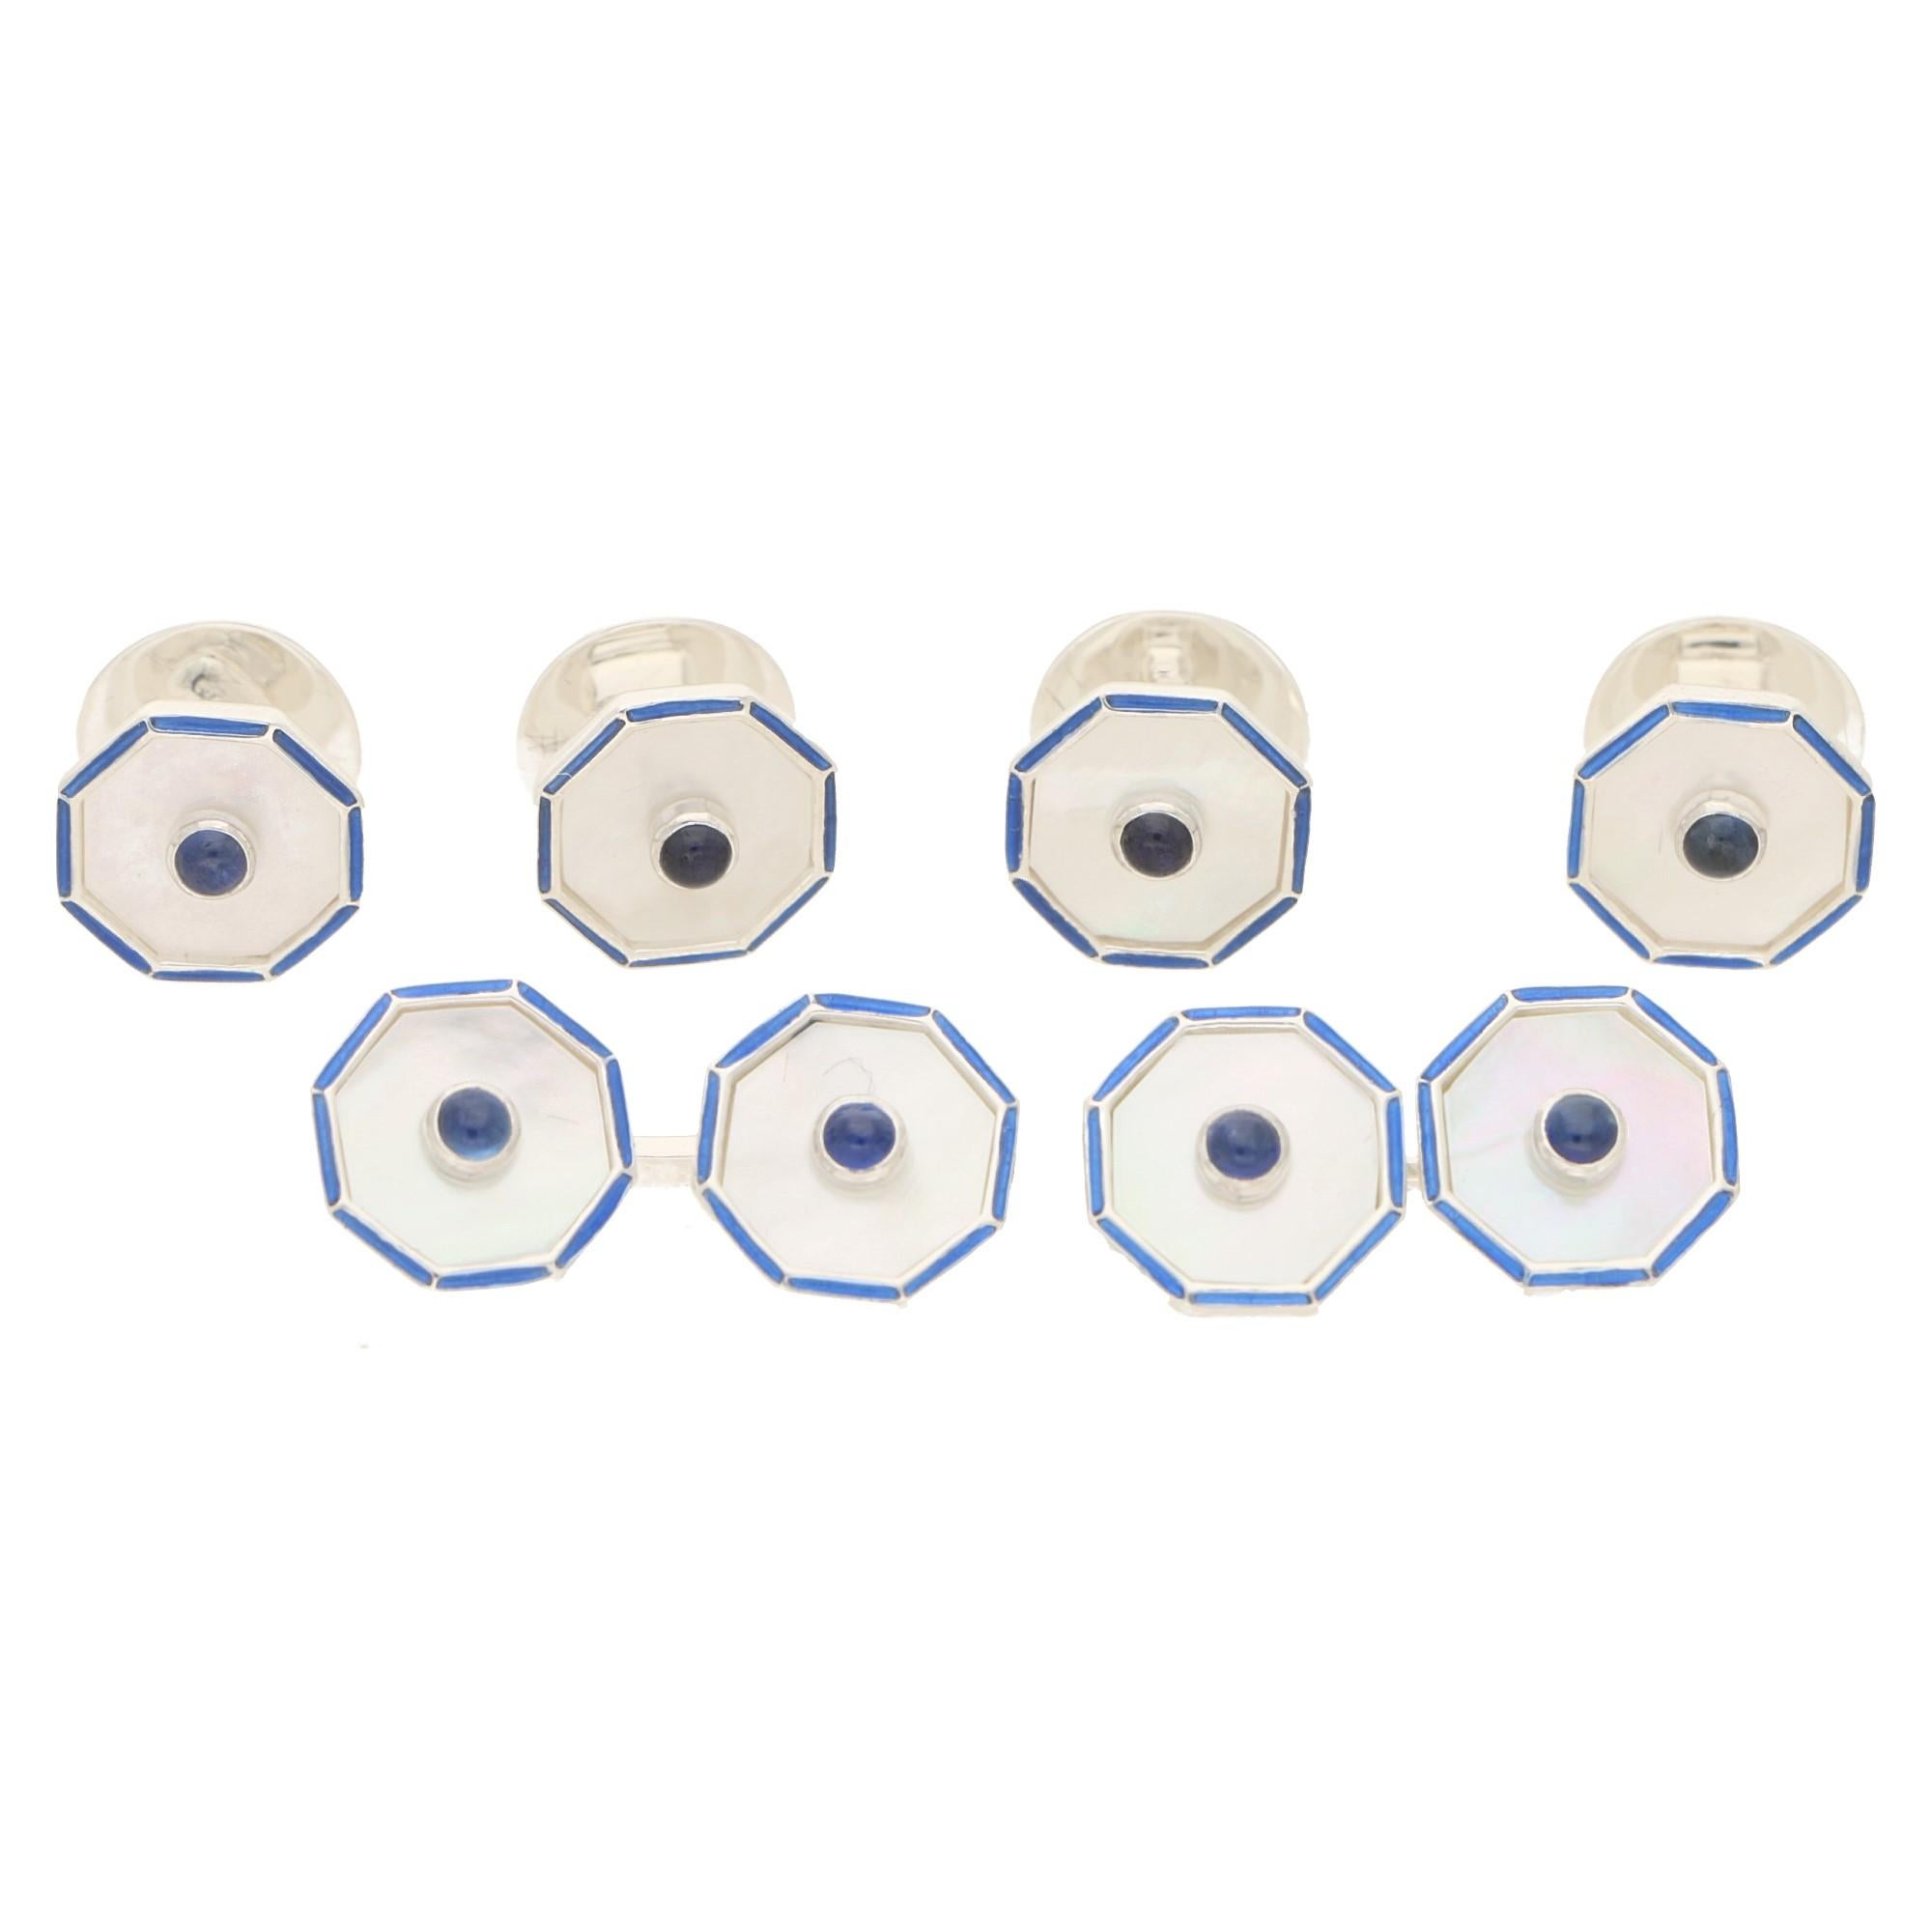 A sophisticated set of mother-of-pearl, sapphire and enamel cufflinks and matching shirt studs in solid silver. Each set is comprised of four shirt studs and a pair of cufflinks and are each shaped octagonally. Each octagonal head is formed of a